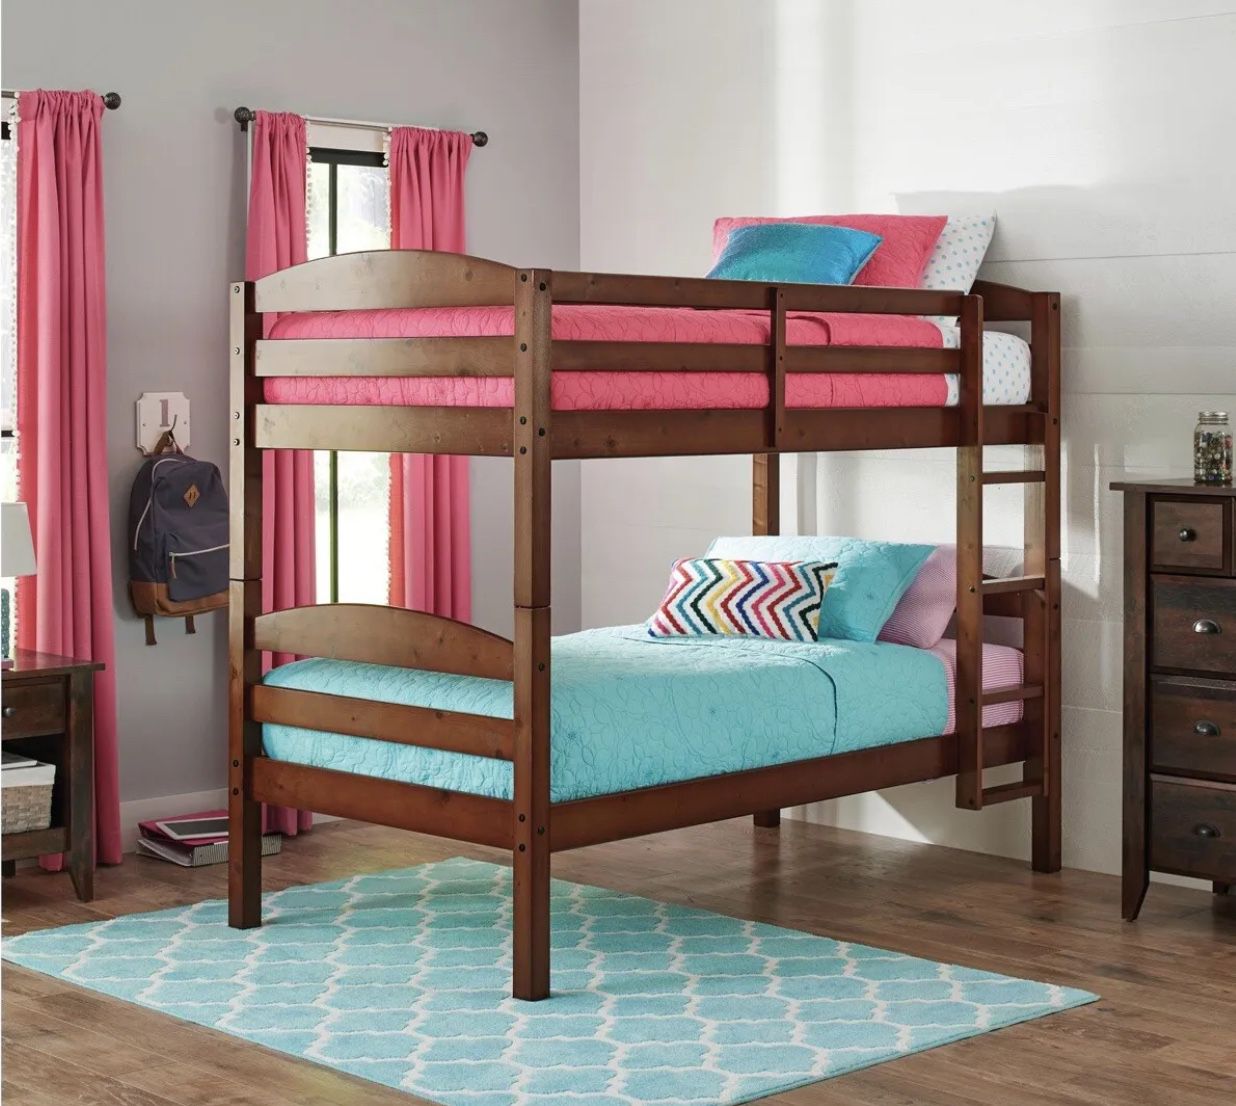 Better Homes & Gardens Leighton Wood Twin-Over-Twin Bunk Bed